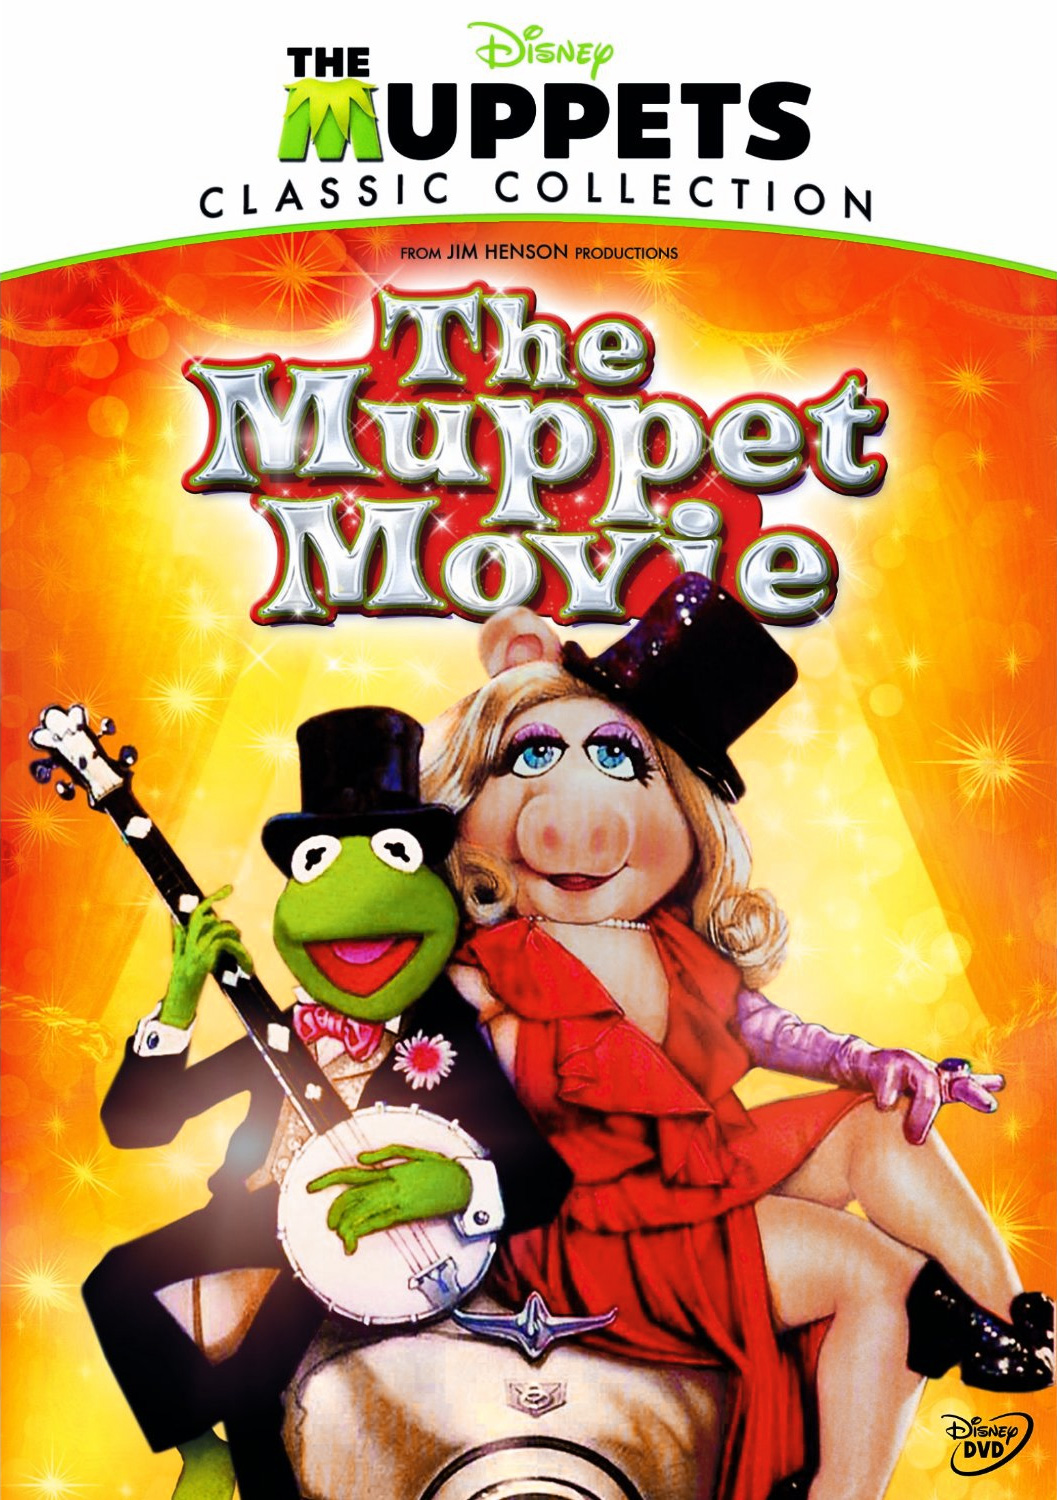 The Muppet Movie DVD Collection